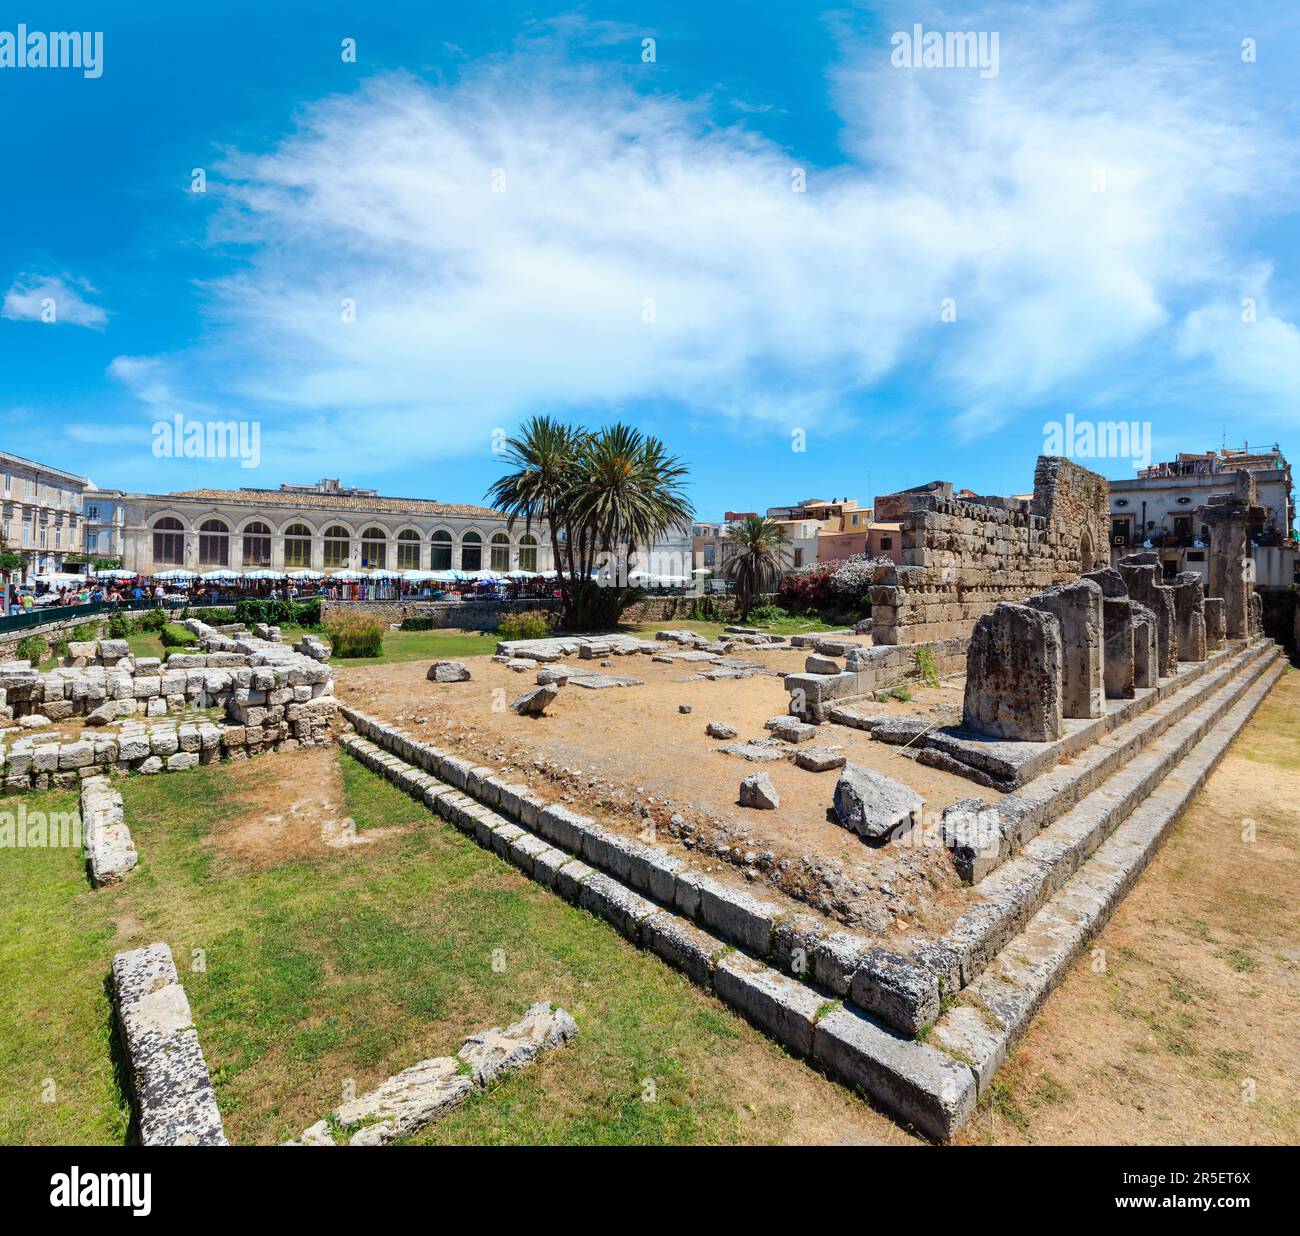 Ruins of Temple of Apollo (ancient Greek monuments on Ortygia island at city of Syracuse, Sicily, Italy). Beautiful travel photo of Sicily. People unr Stock Photo